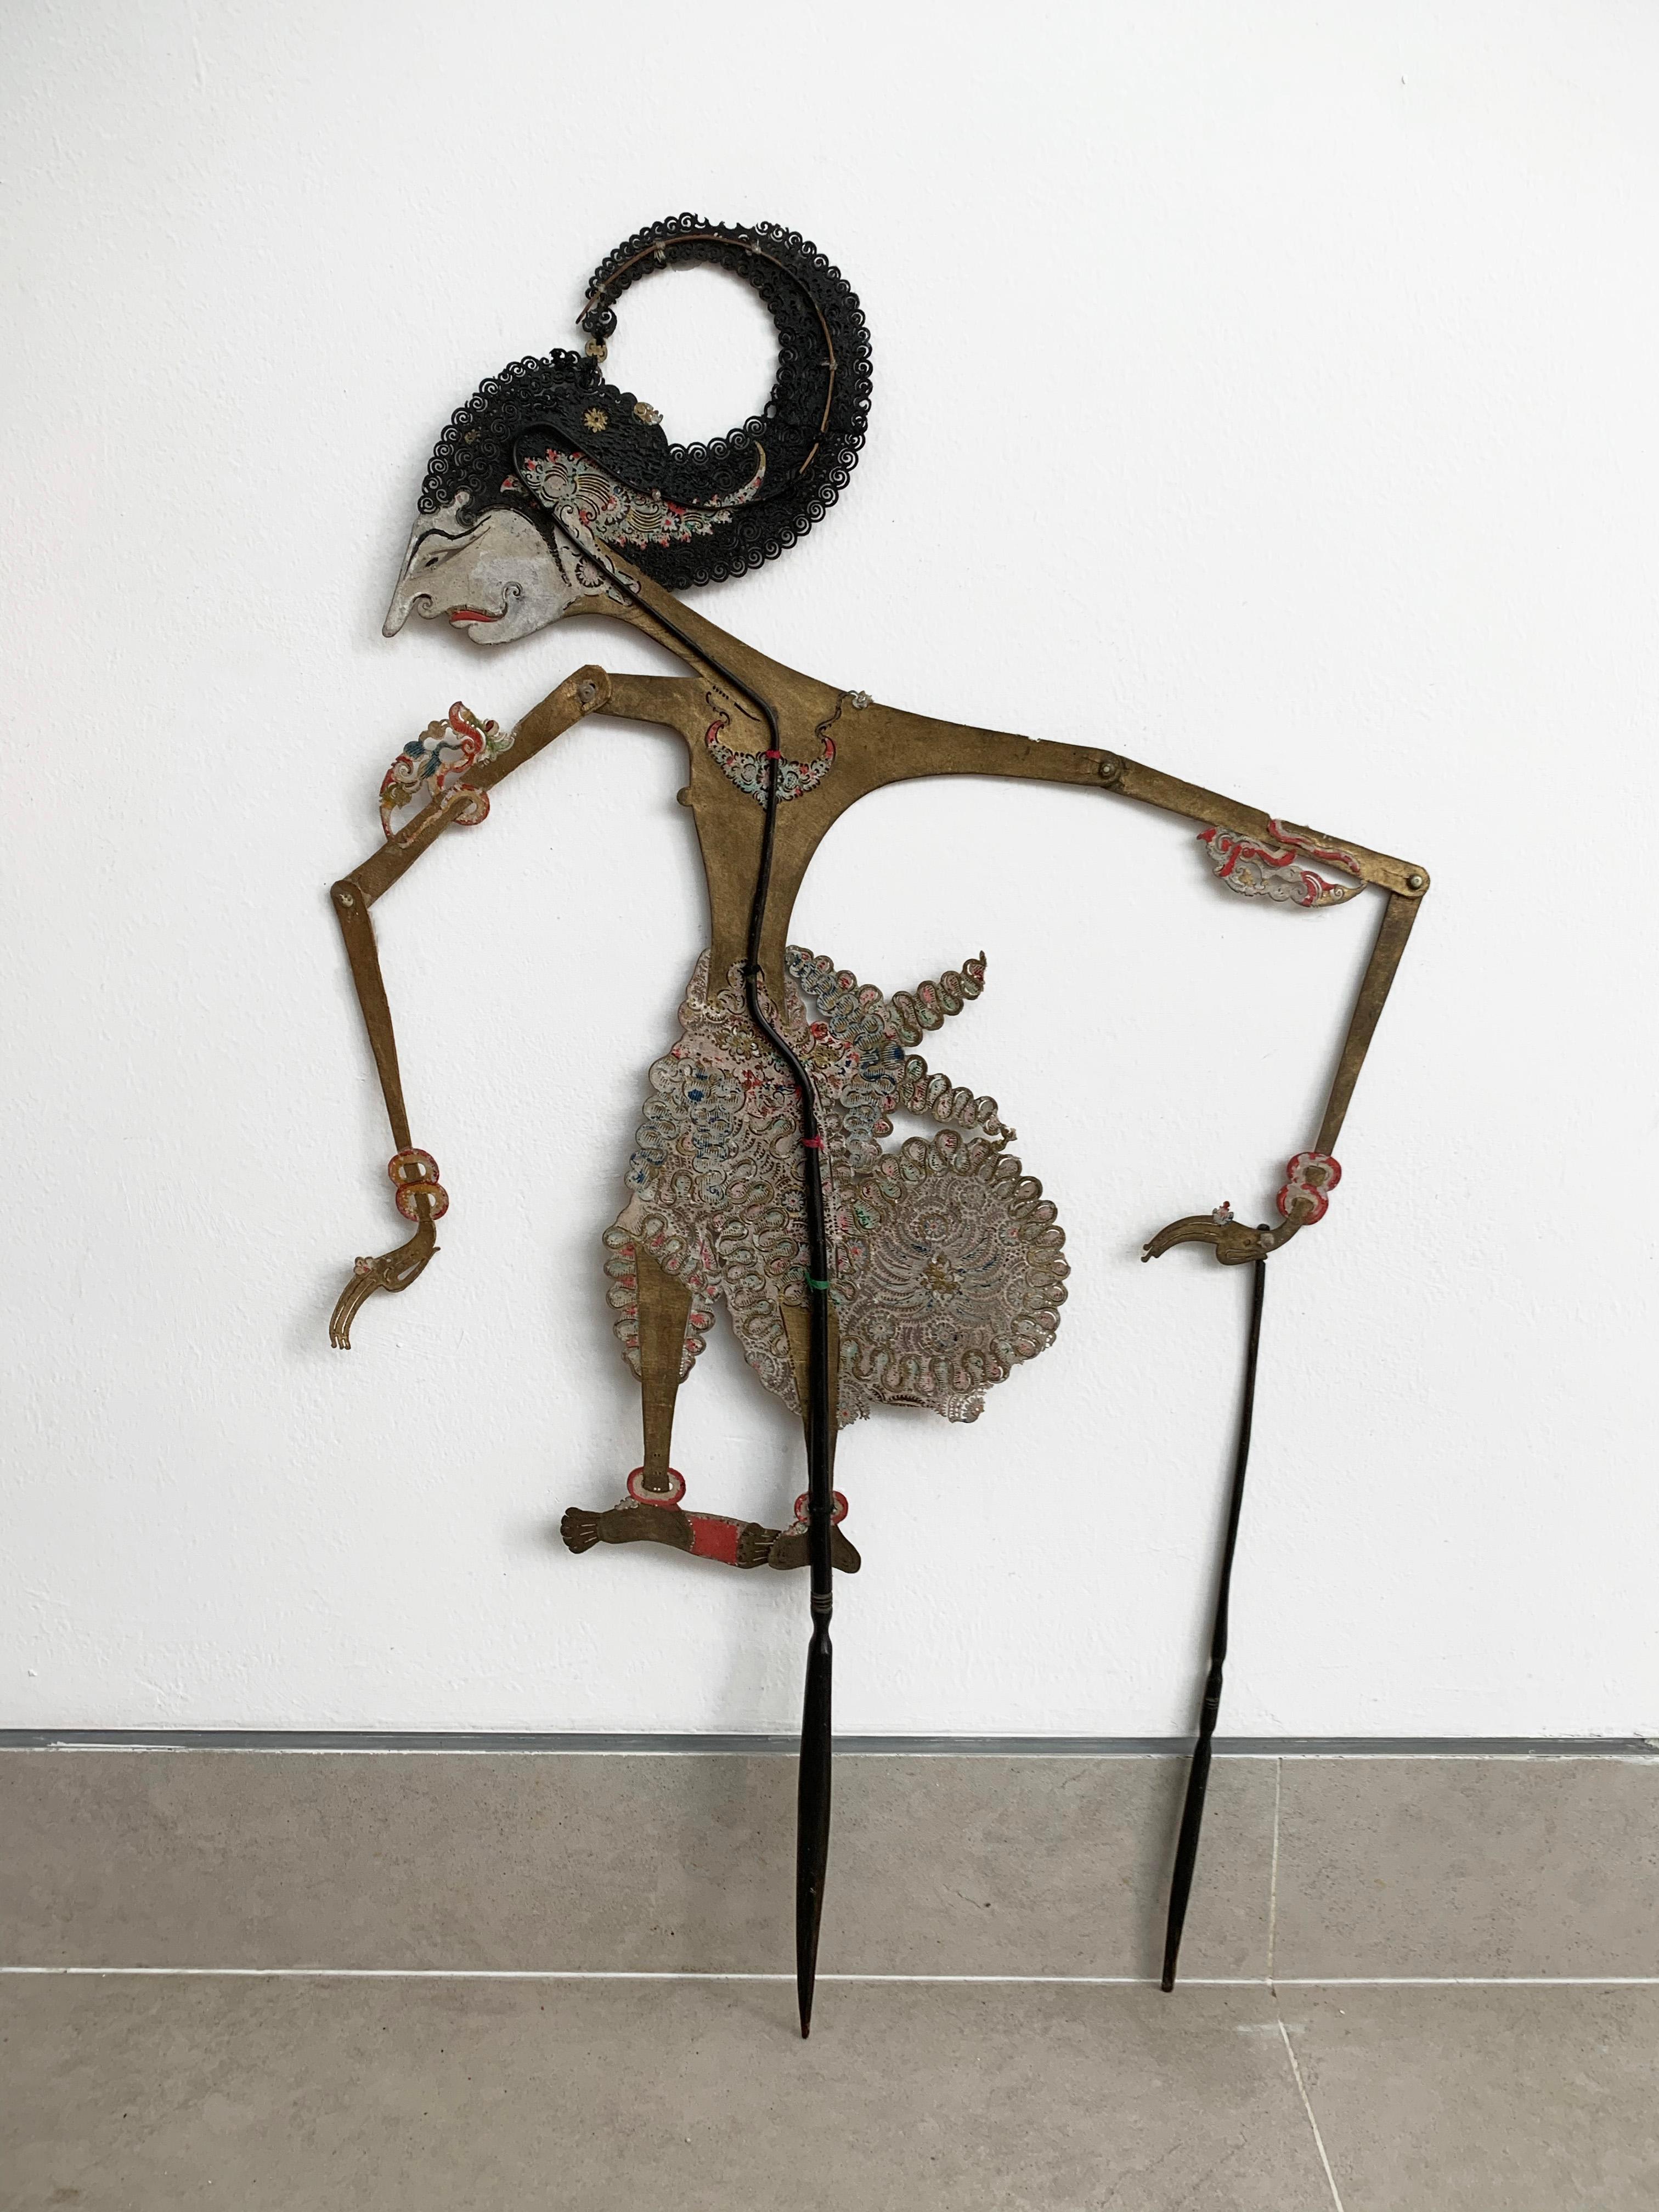 This flat shadow puppet was crafted on the island of Java by a puppet artist using buffalo hide and mounted on bamboo sticks. It features movable arms, controlled by outer bamboo rods (however this puppet lost one of its bamboo rods over the years